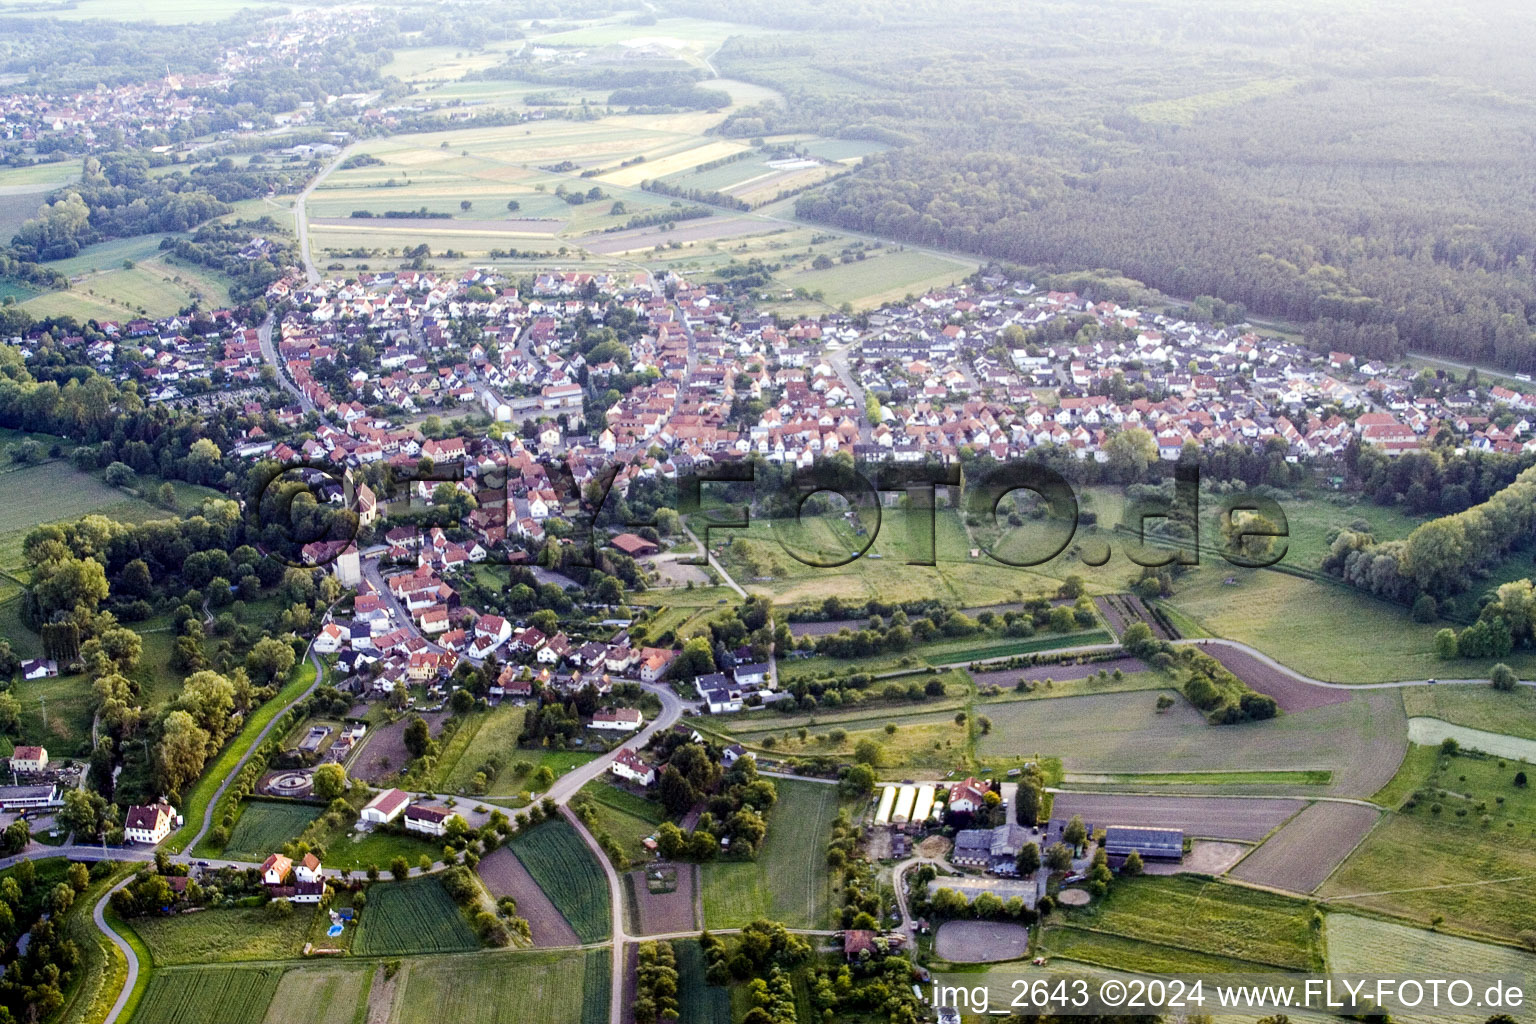 Village view in Berg (Pfalz) in the state Rhineland-Palatinate seen from above